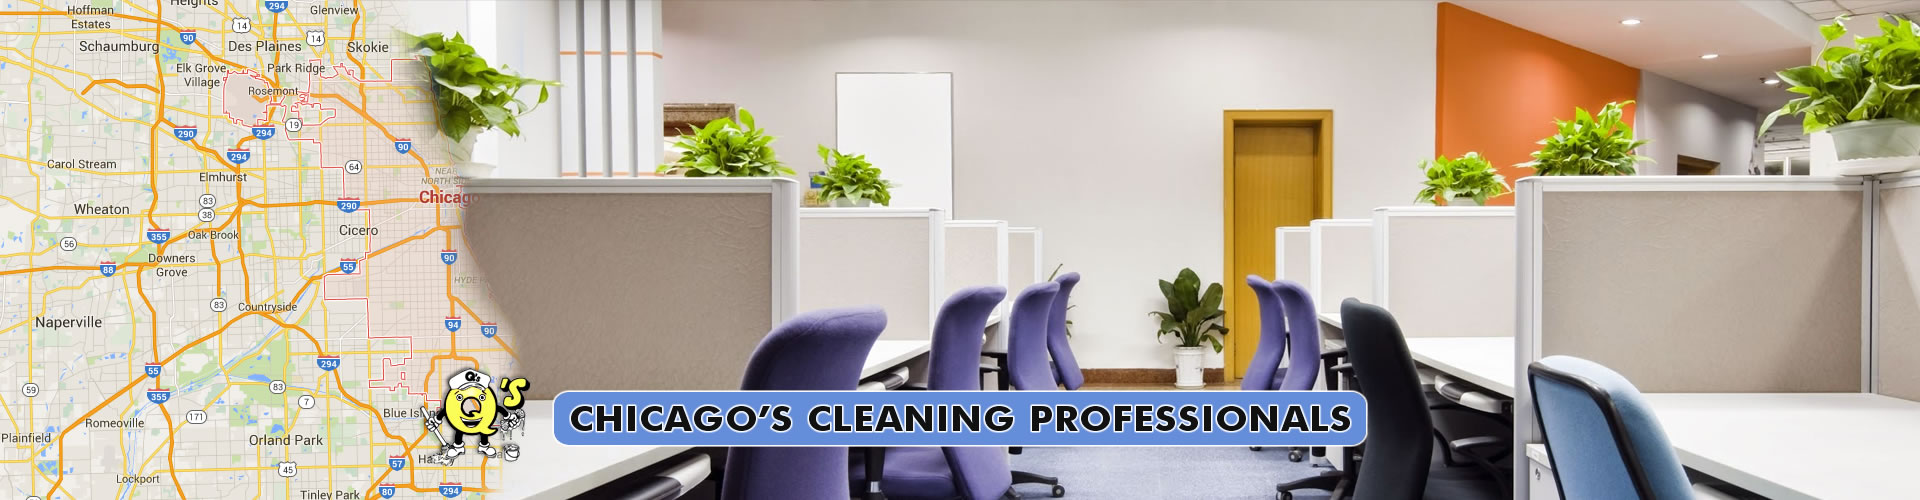 Chicago's Cleaning Professionals